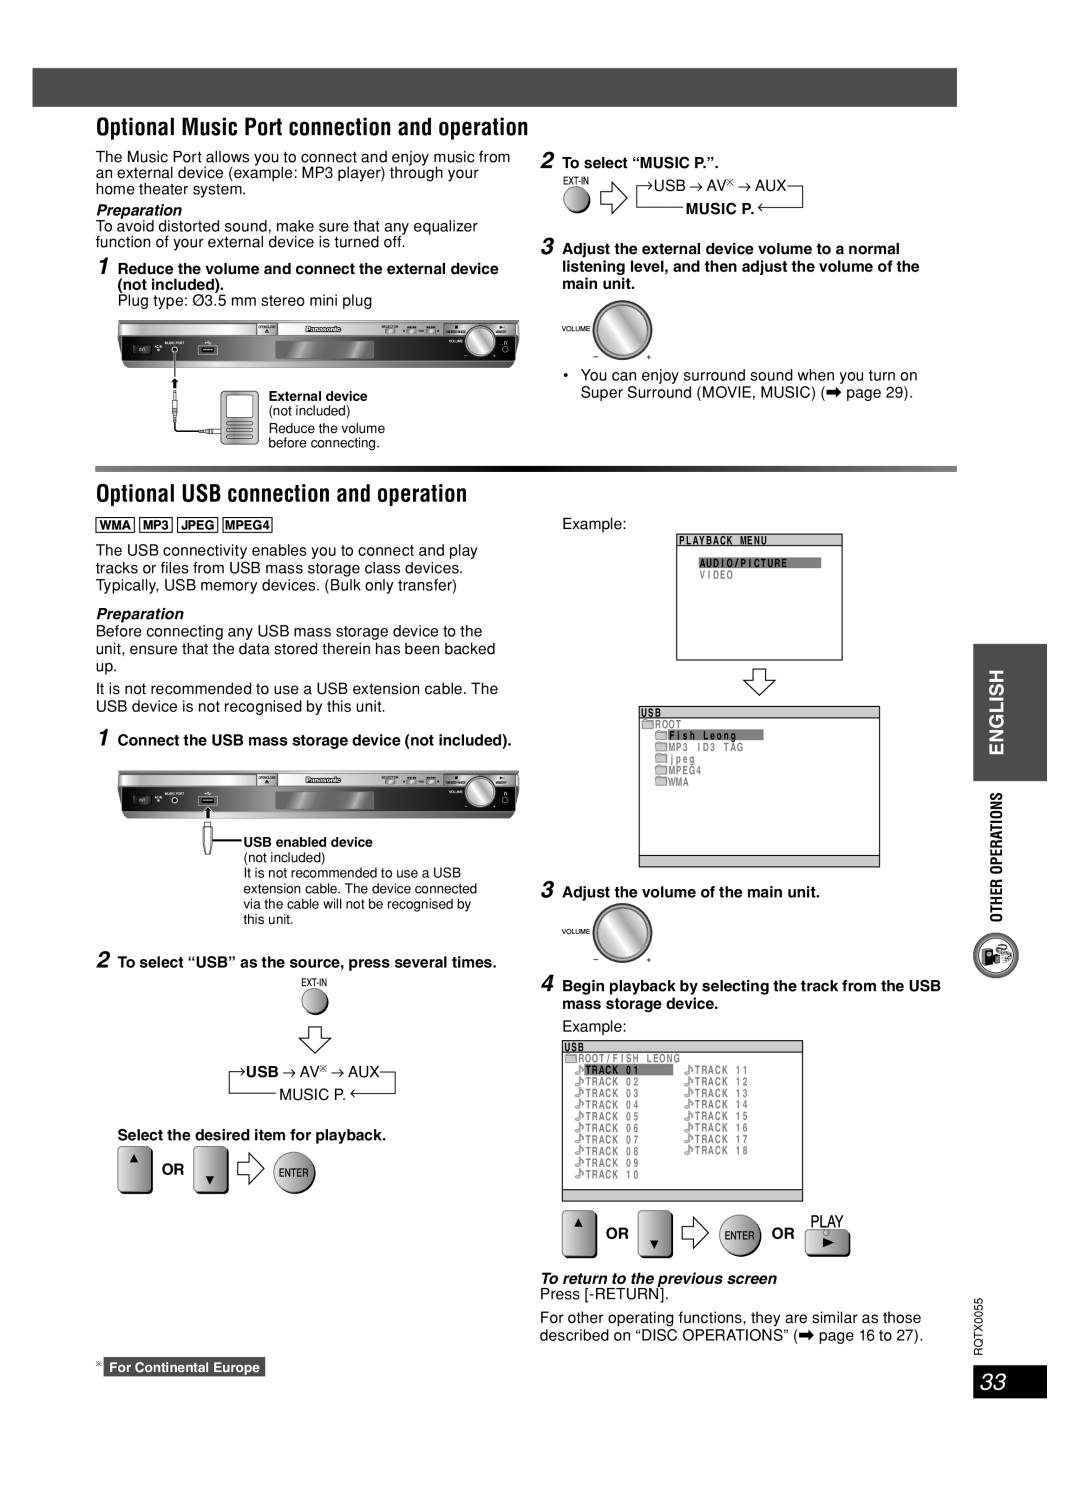 Panasonic SC-PT 250 manual Optional USB connection and operation, Preparation, To select “MUSIC P.”, Music P, Or Or 